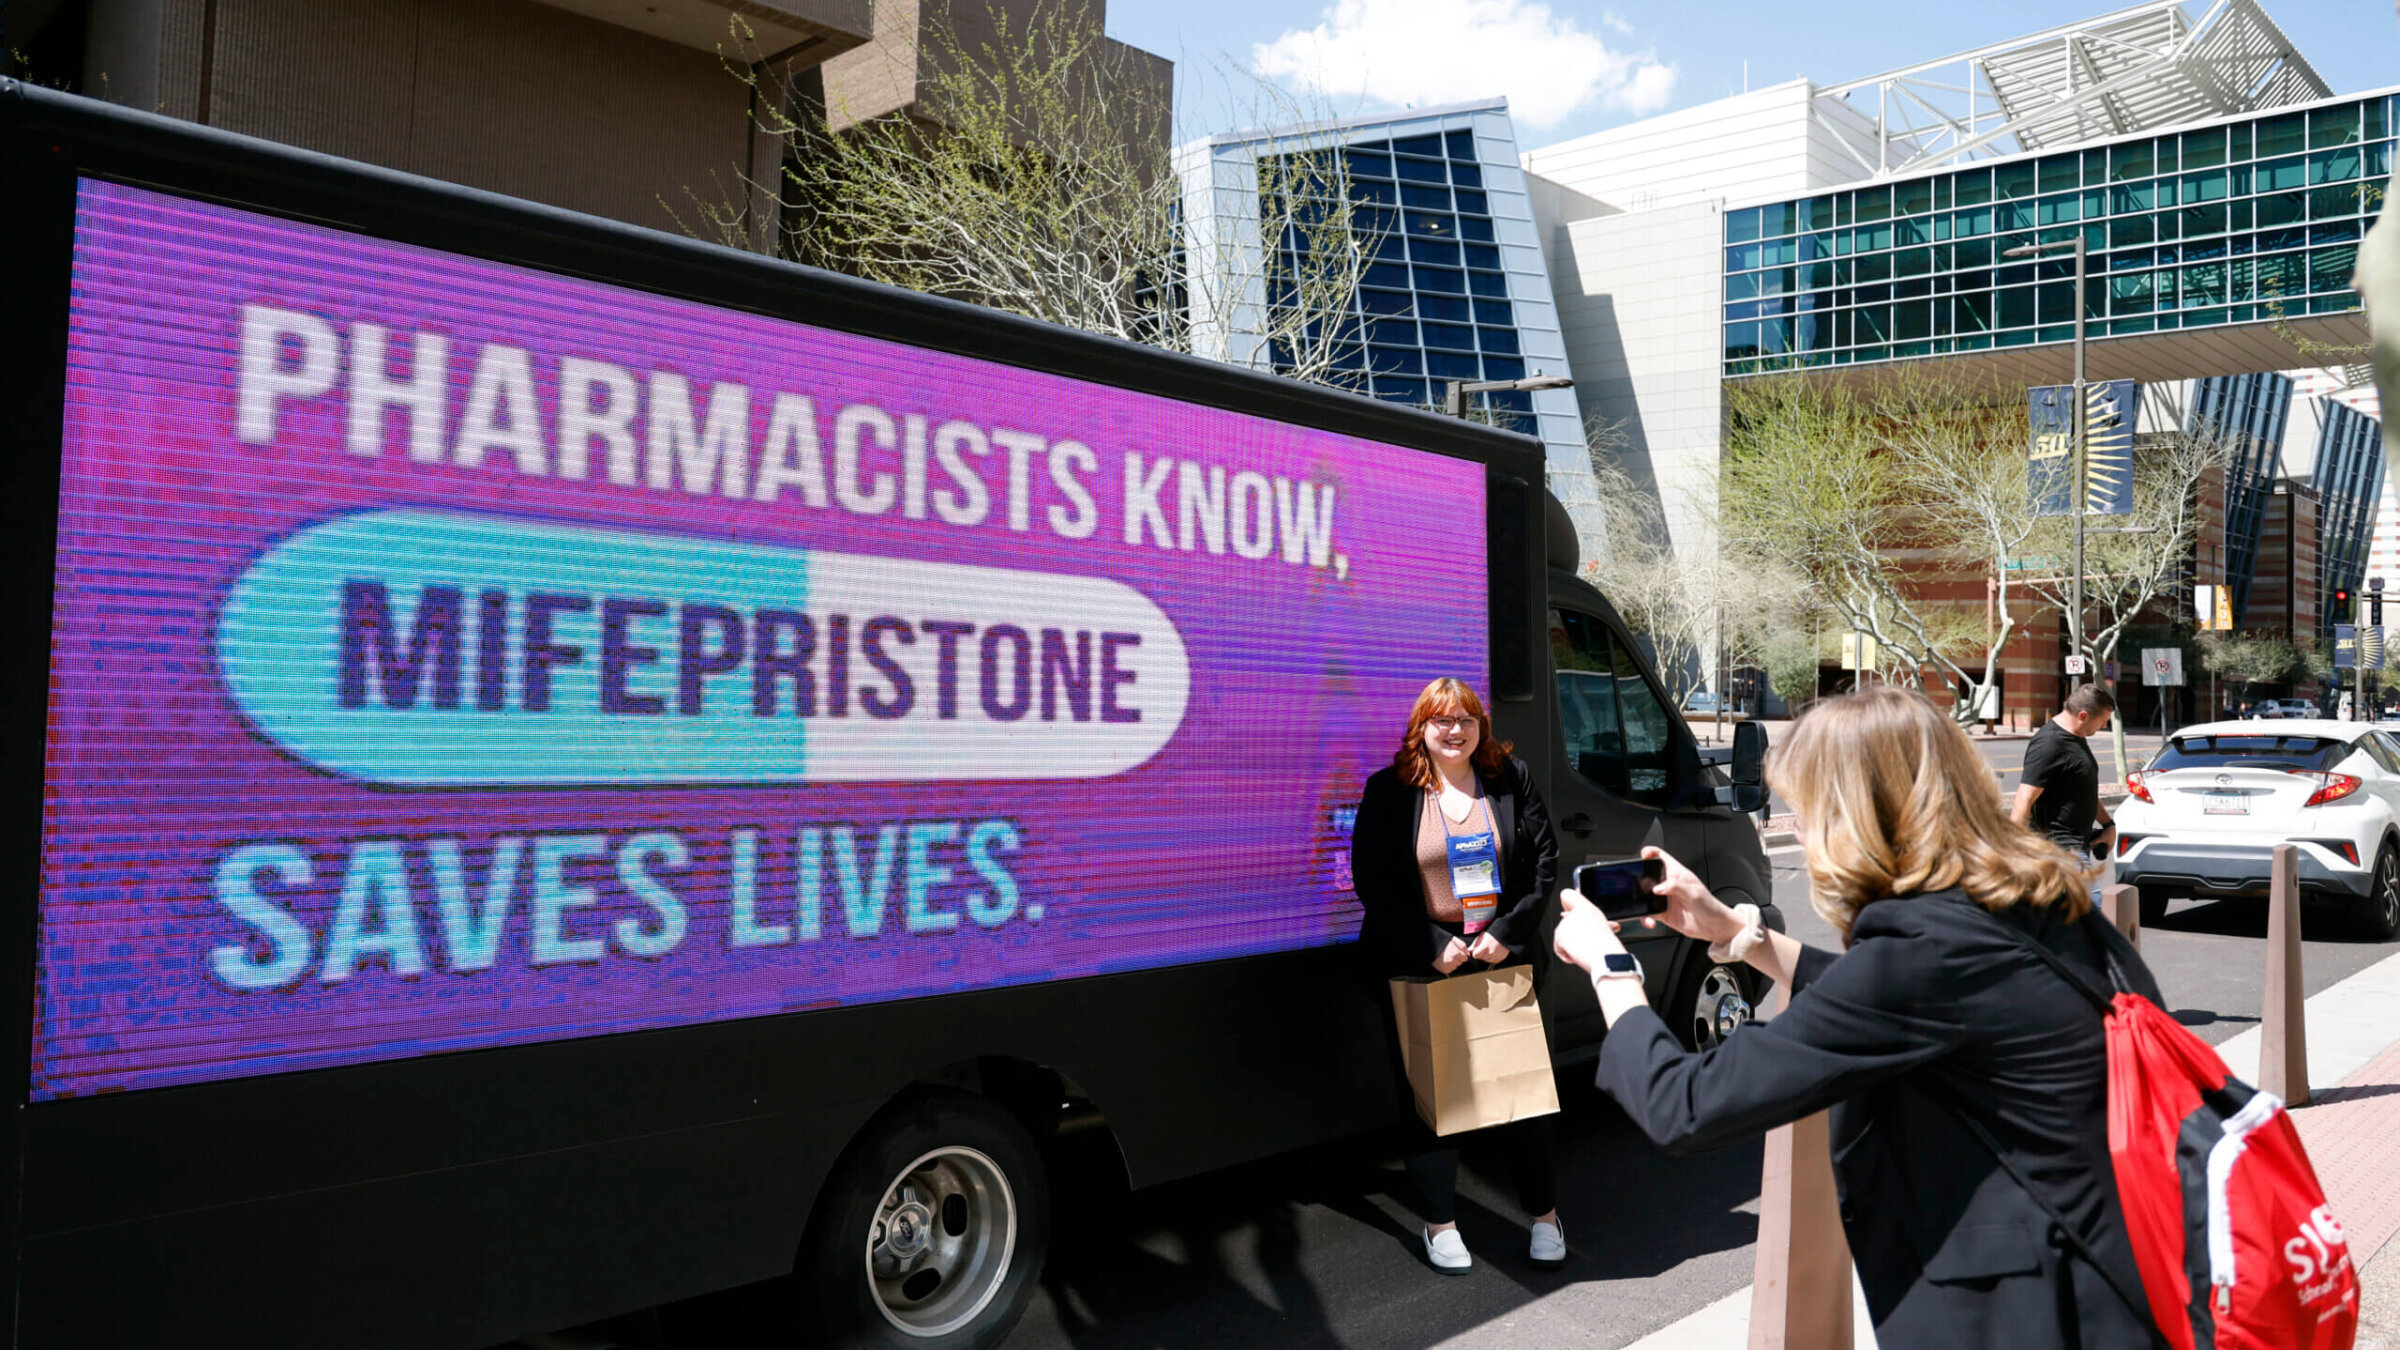 Abortion activists are seen at the American Pharmacists Association Annual Conference at the Phoenix Convention Center on March 25, 2023 in Phoenix, Arizona. Advocacy group UltraViolet are urging pharmacists to reaffirm that Mifepristone, a medication abortion drug, is safe, effective and essential. 